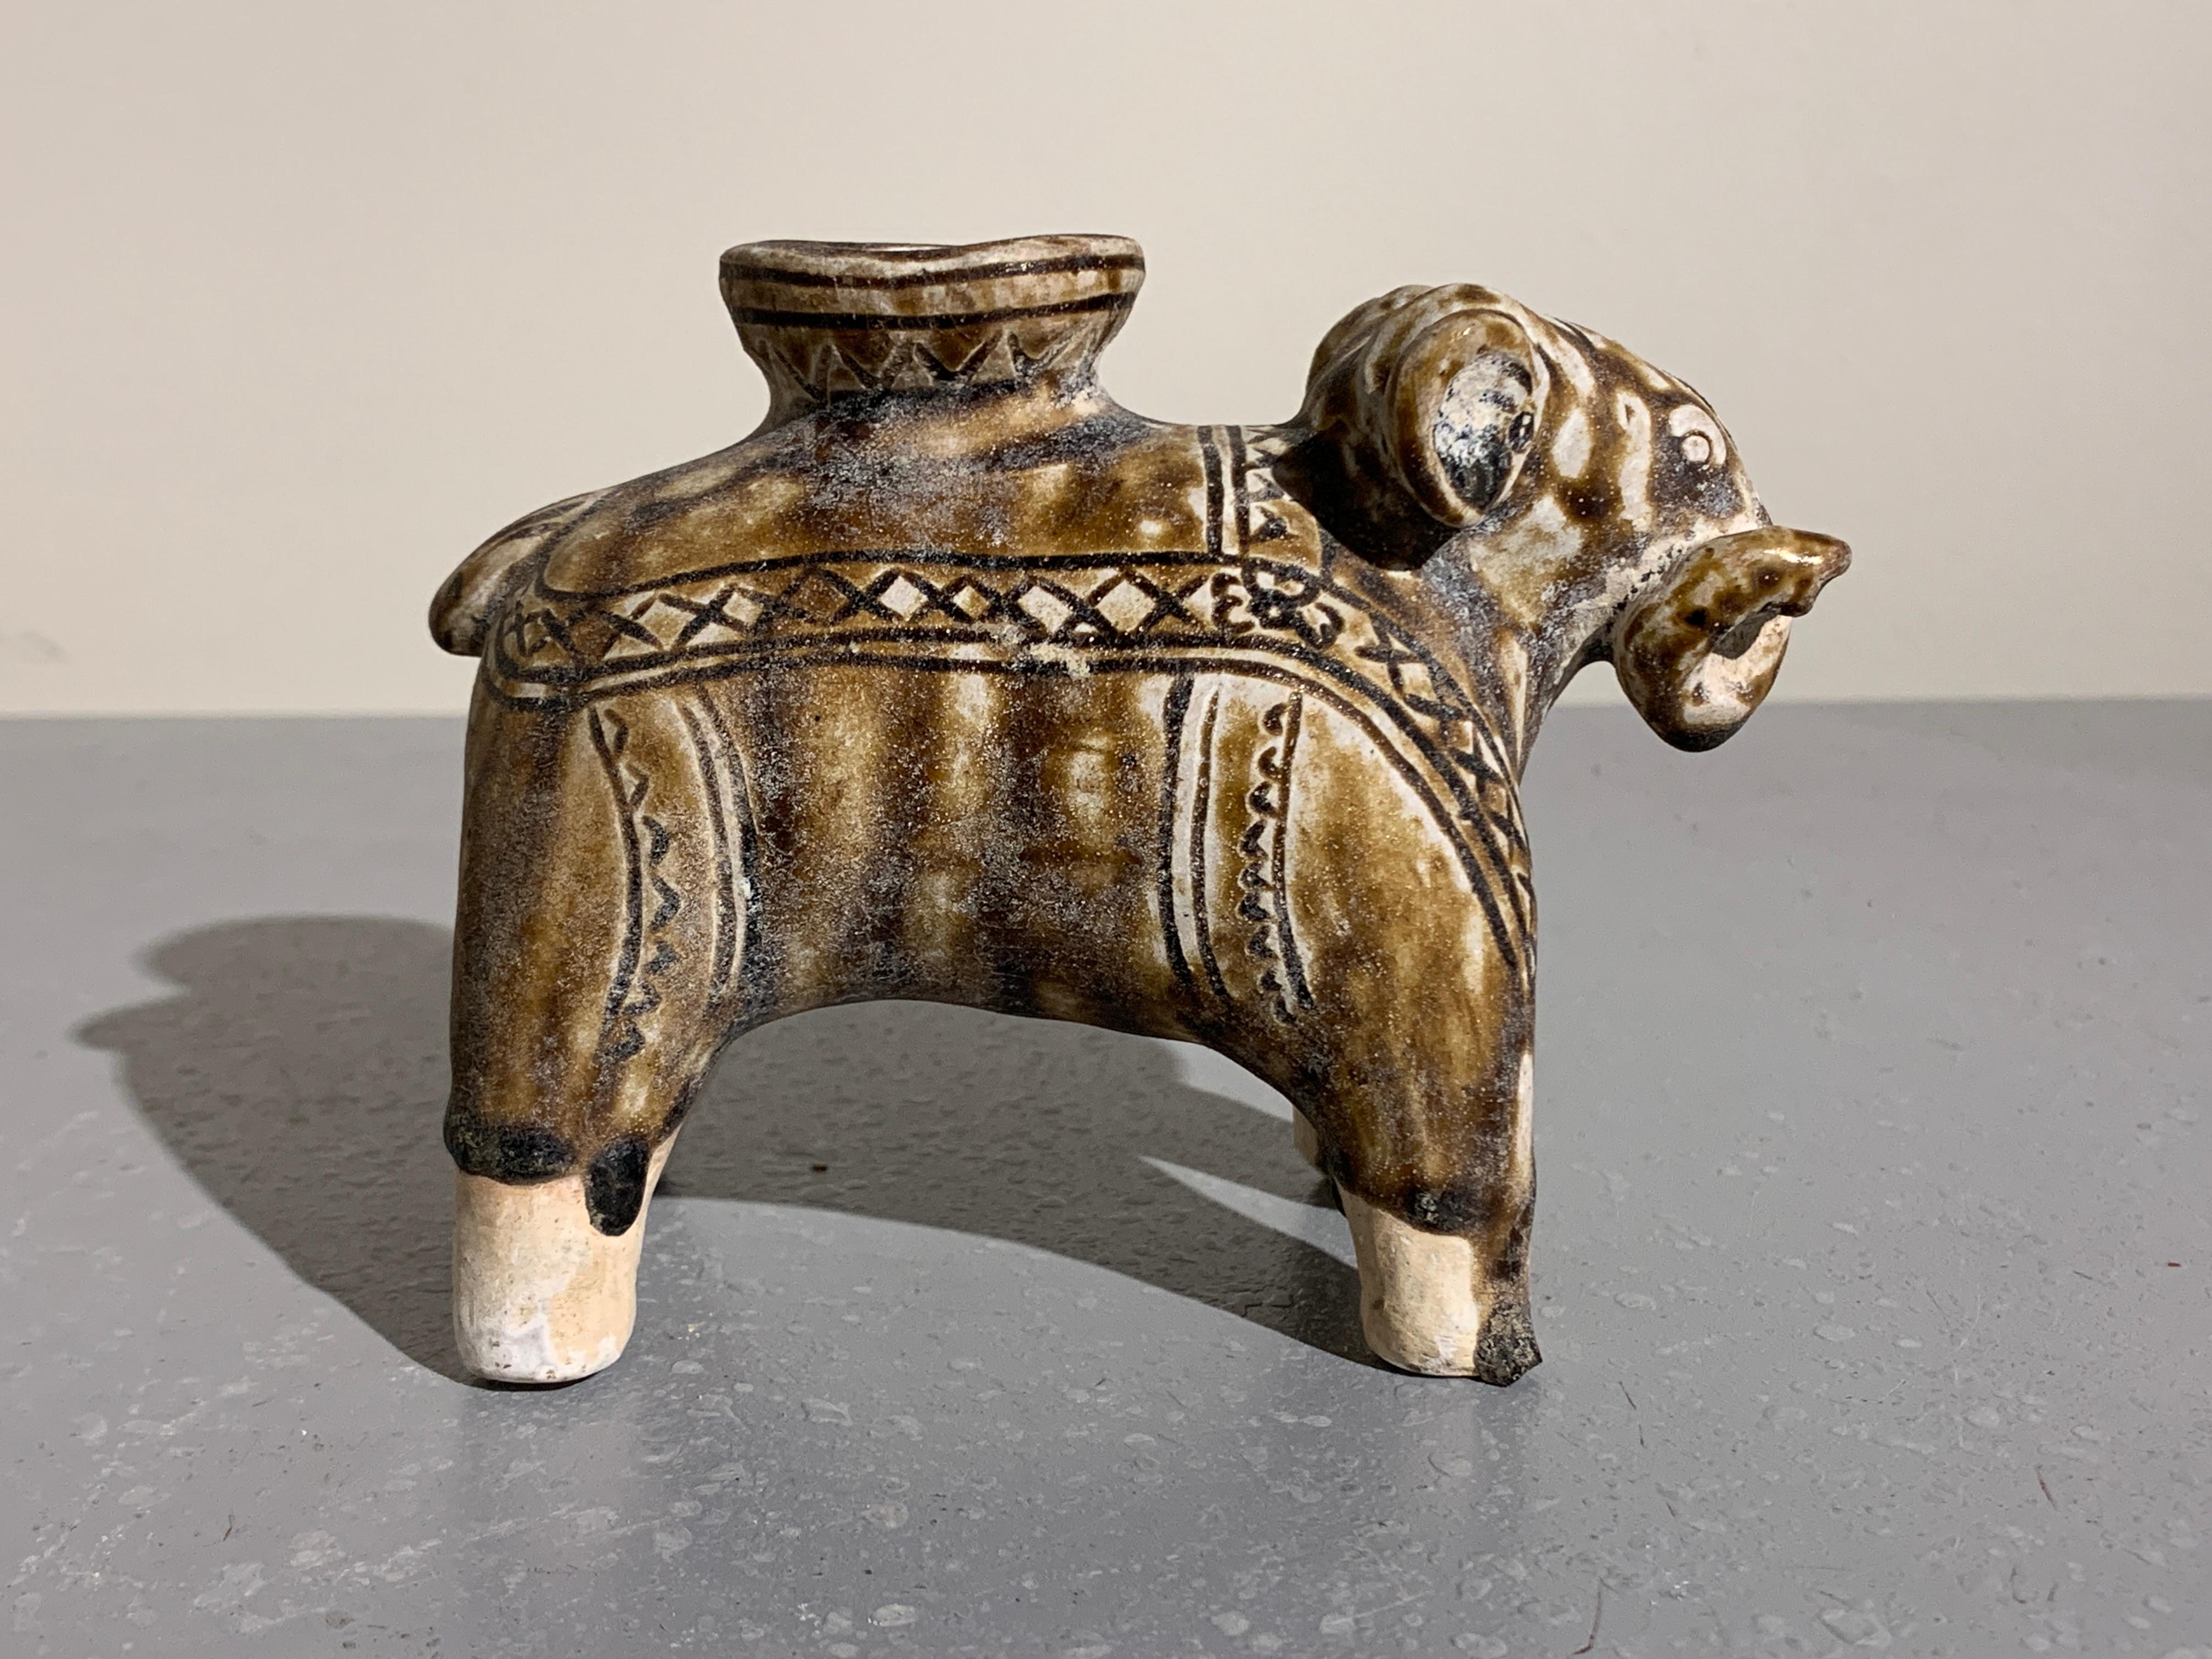 A charming Sawankhalok brown glazed figure of an elephant, Sukhothai Period, Thailand, early 14th century.
The cartoon-like elephant stands foursquare on stout legs, looking straight ahead. His trunk and tail are both curled to one side, with his